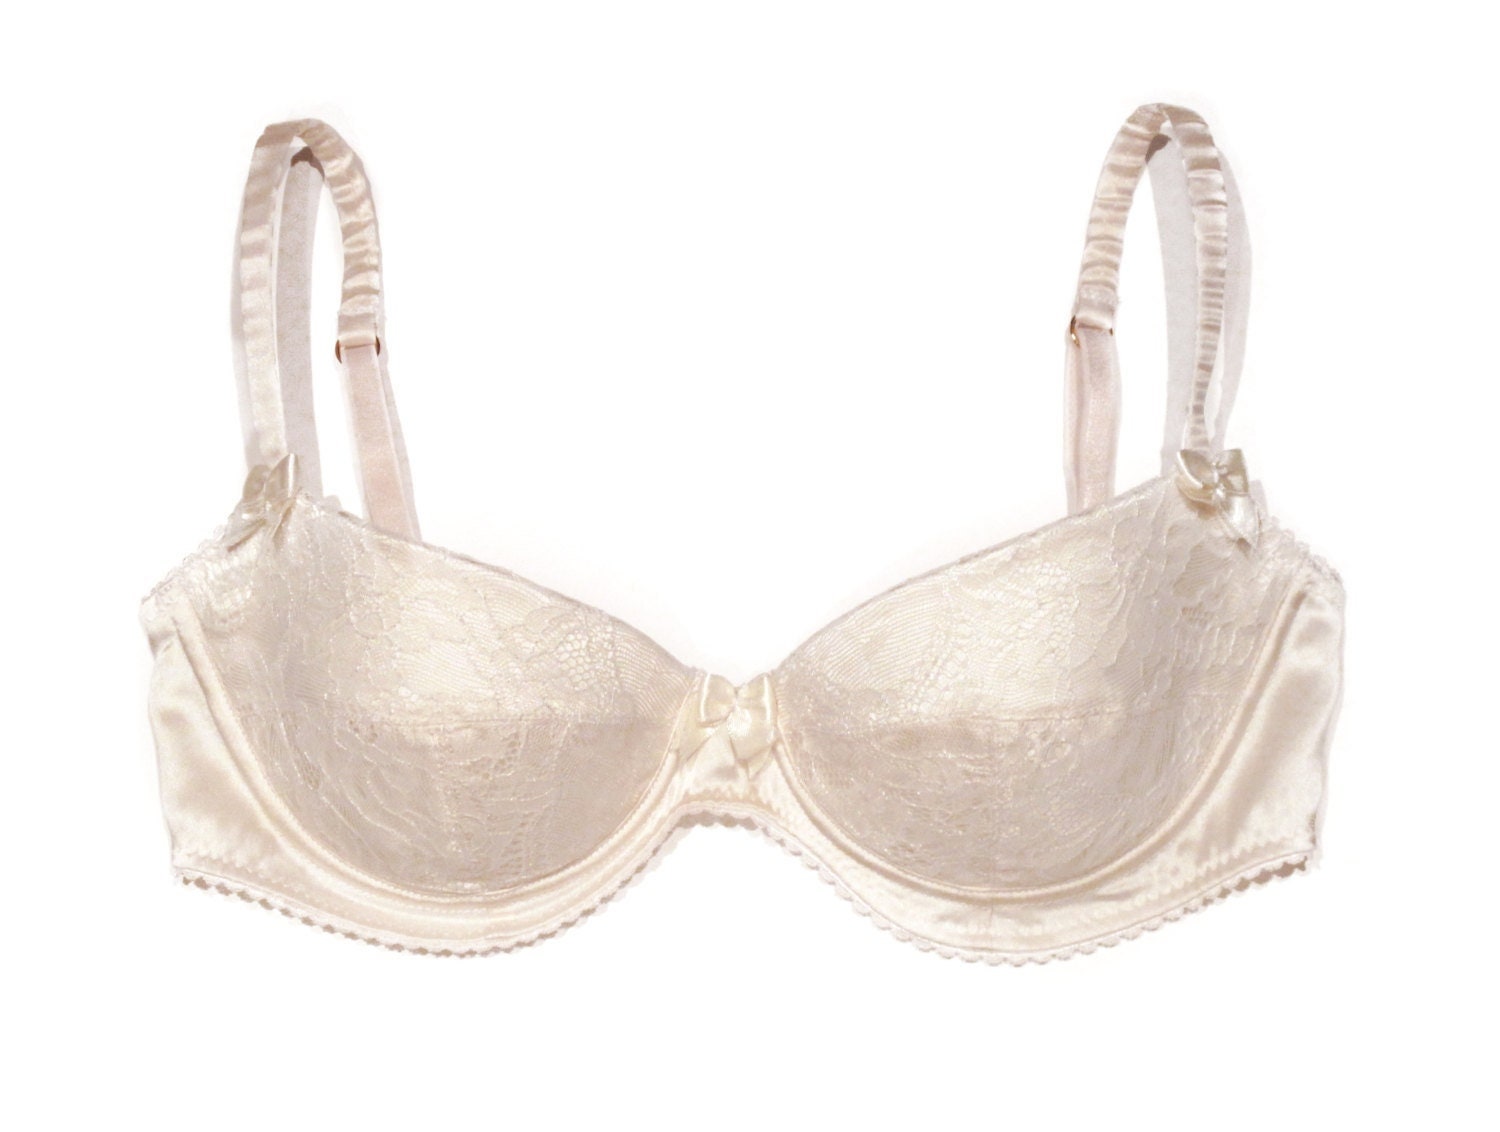 Stretch Satin Silk Plunge Bra, Slightly Padded, Covered With Lace